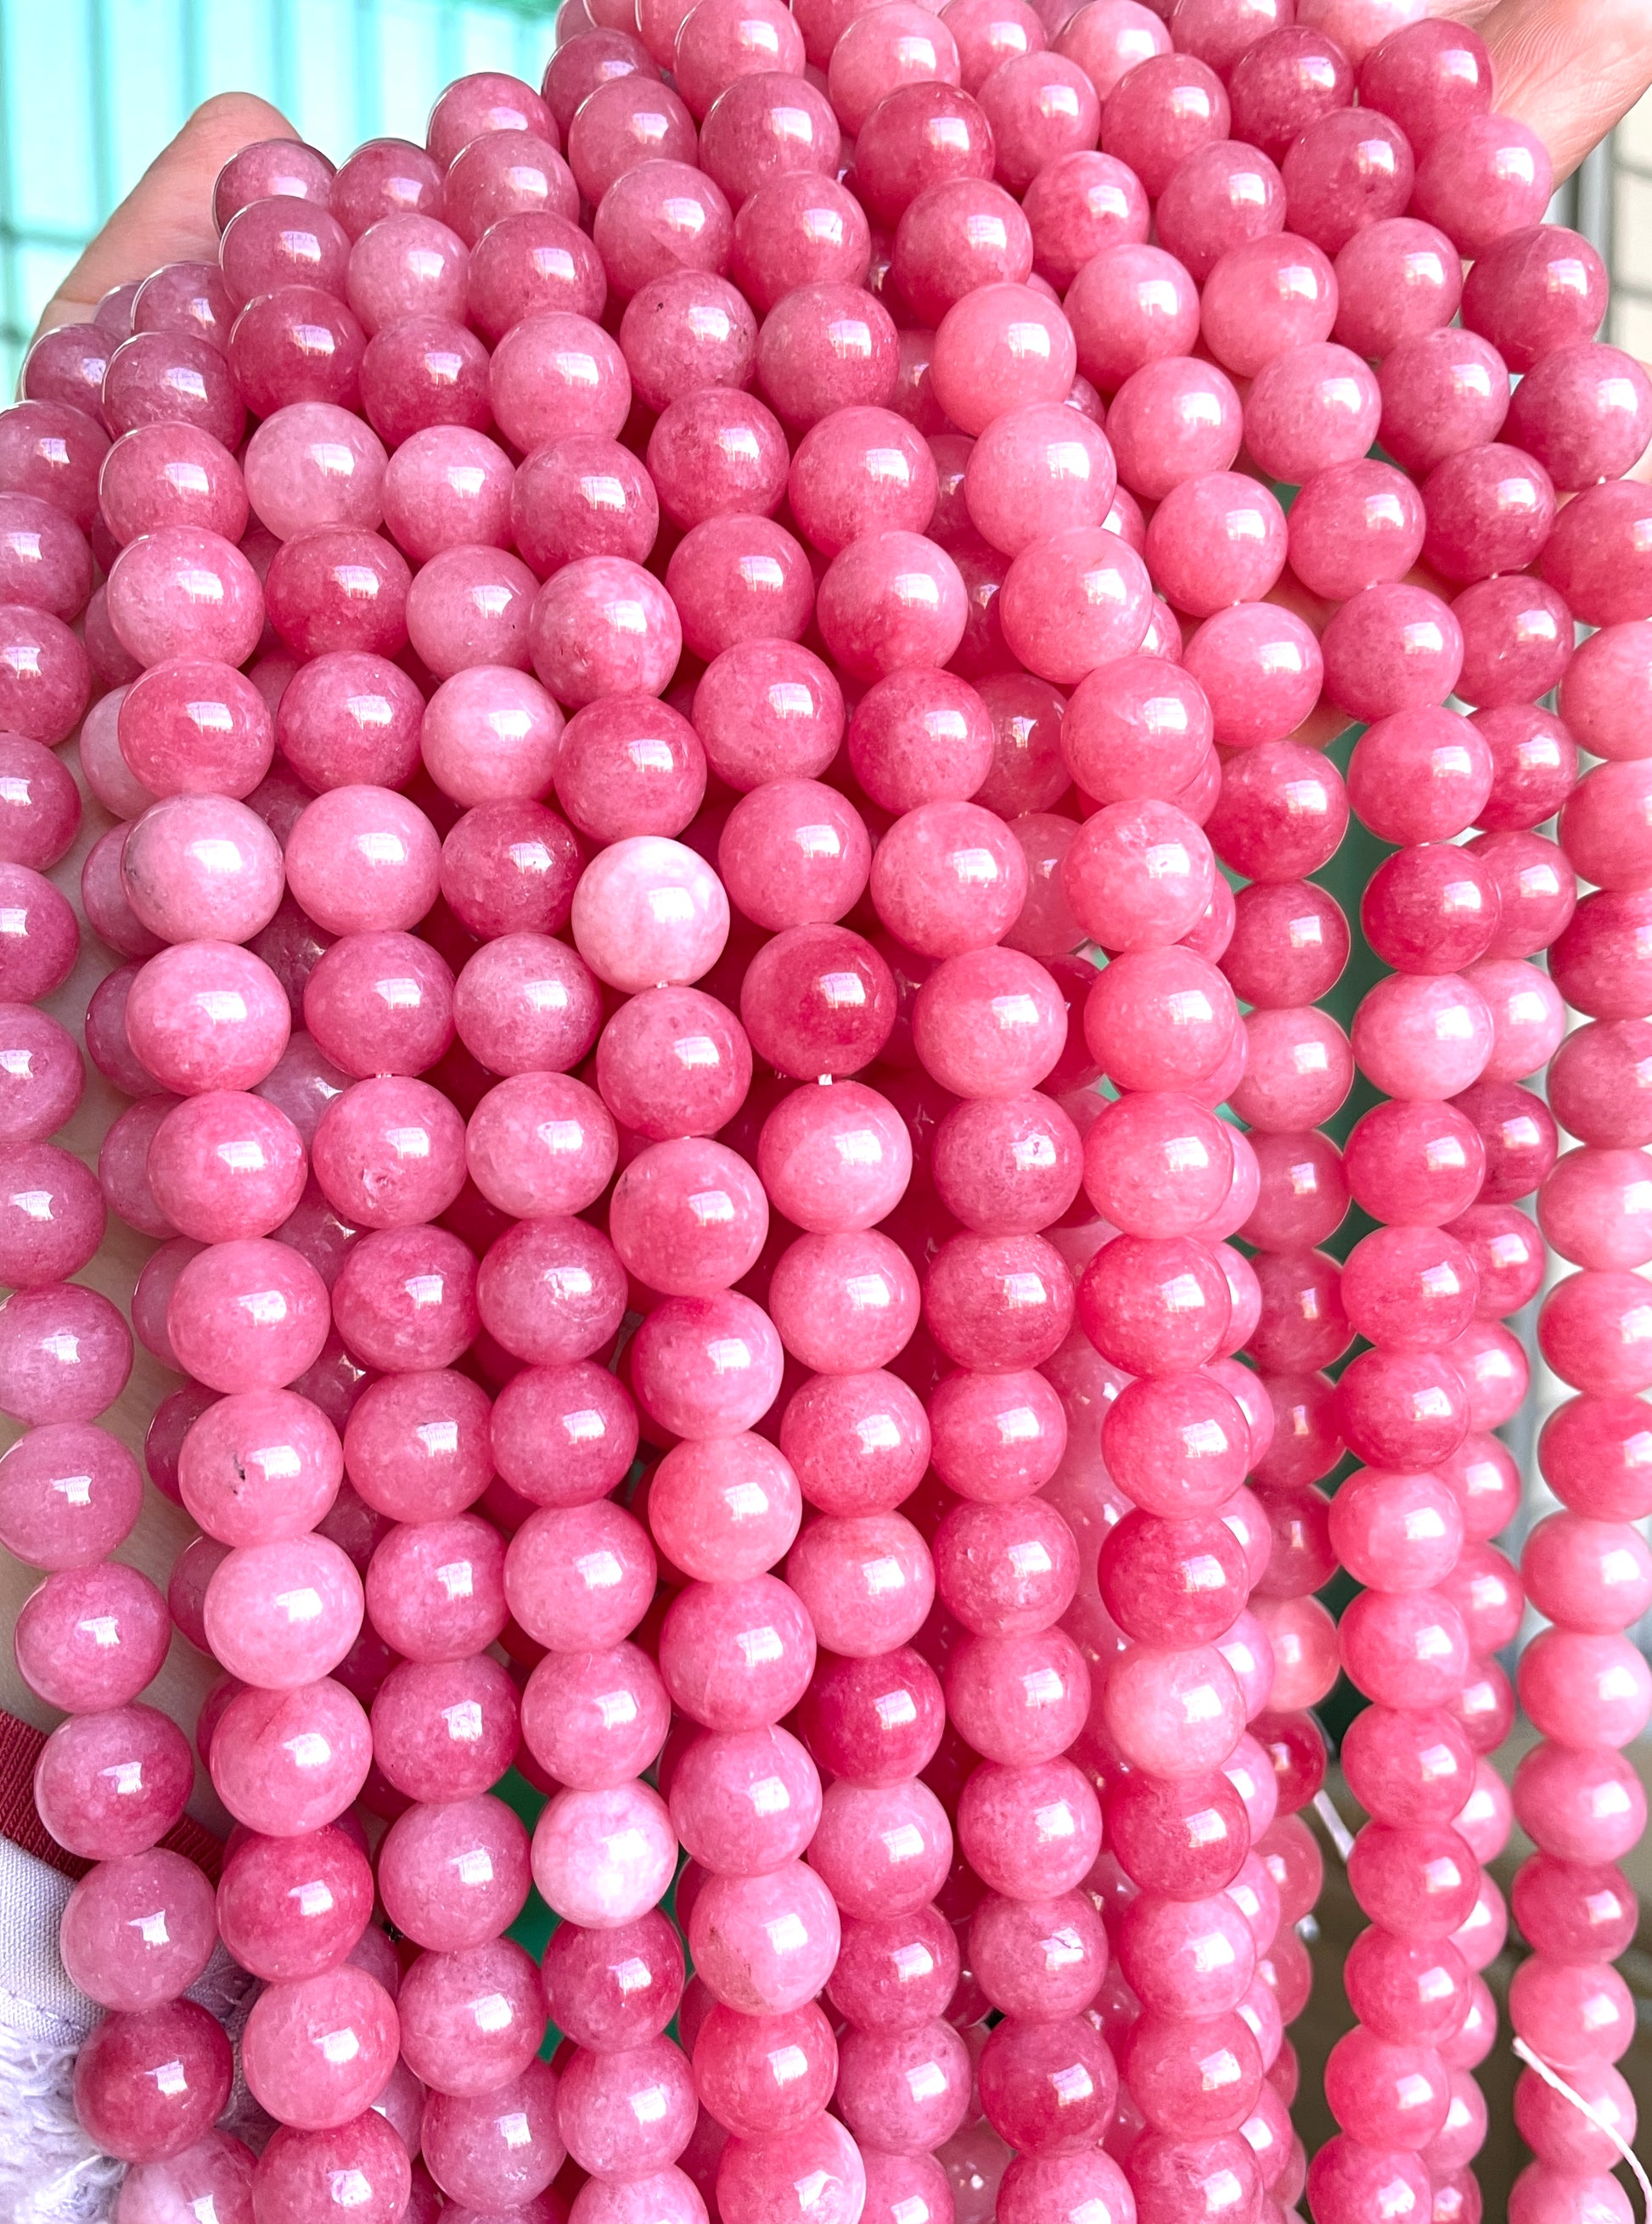 2 Strands/lot 10/12mm Pink Chalcedony Jade Round Stone Beads Stone Beads 12mm Stone Beads New Beads Arrivals Other Stone Beads Charms Beads Beyond